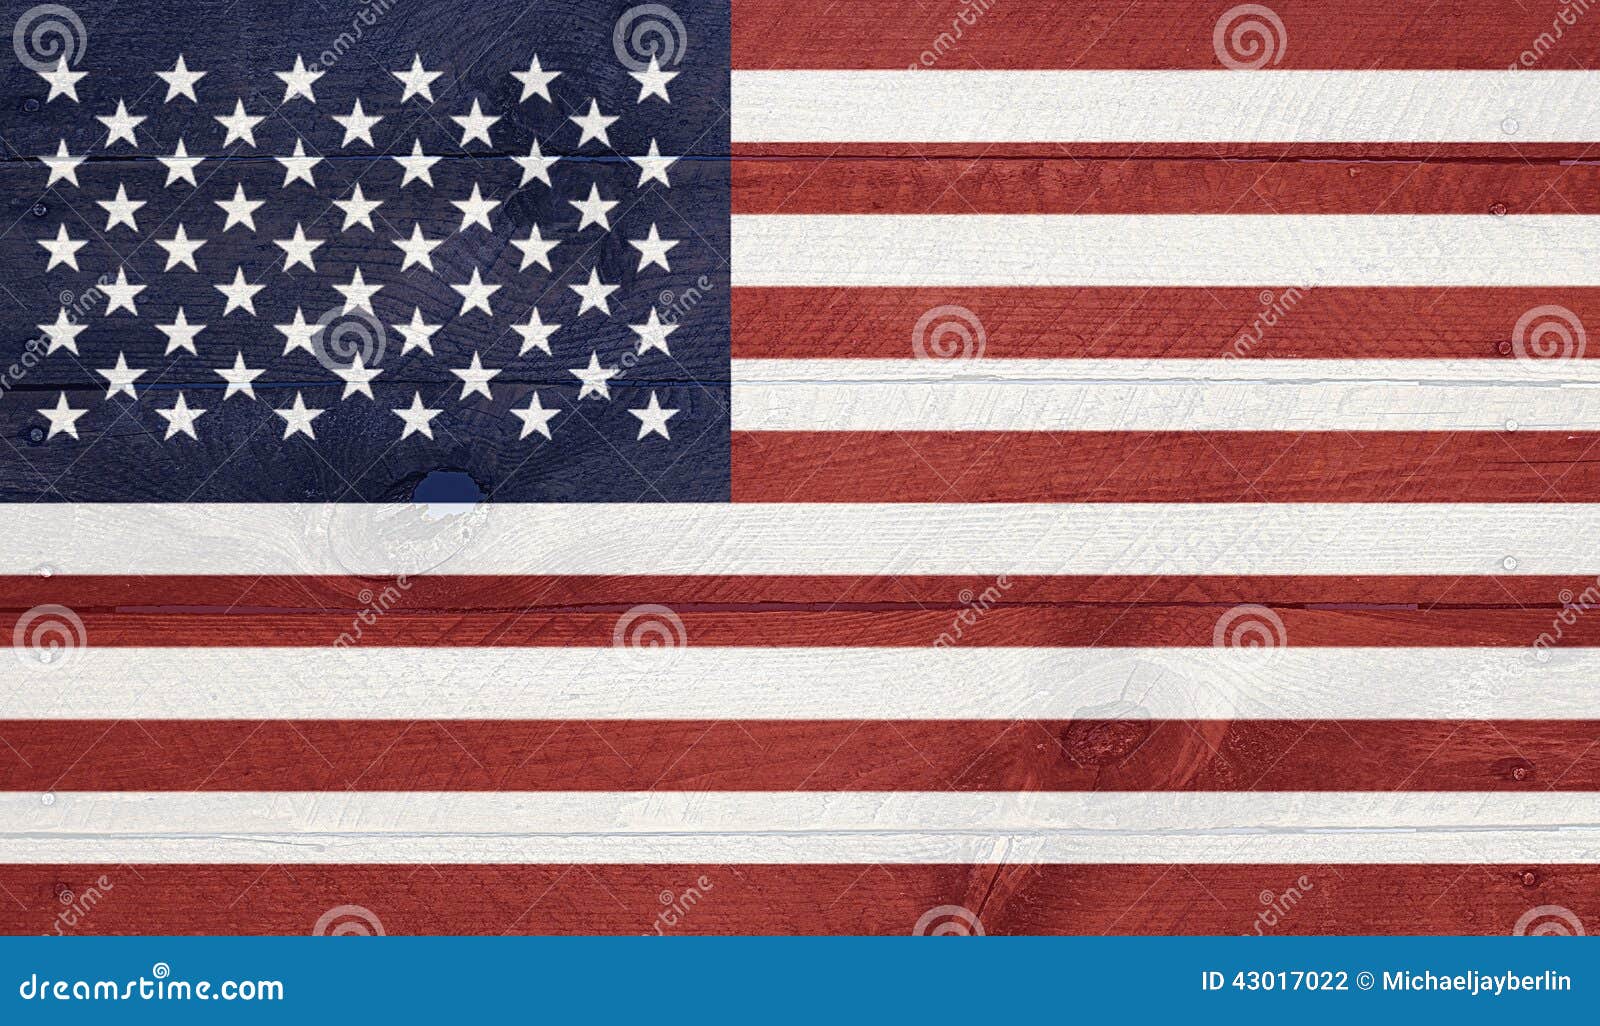 USA Flag On Wood Boards With Nails Stock Photo - Image ...